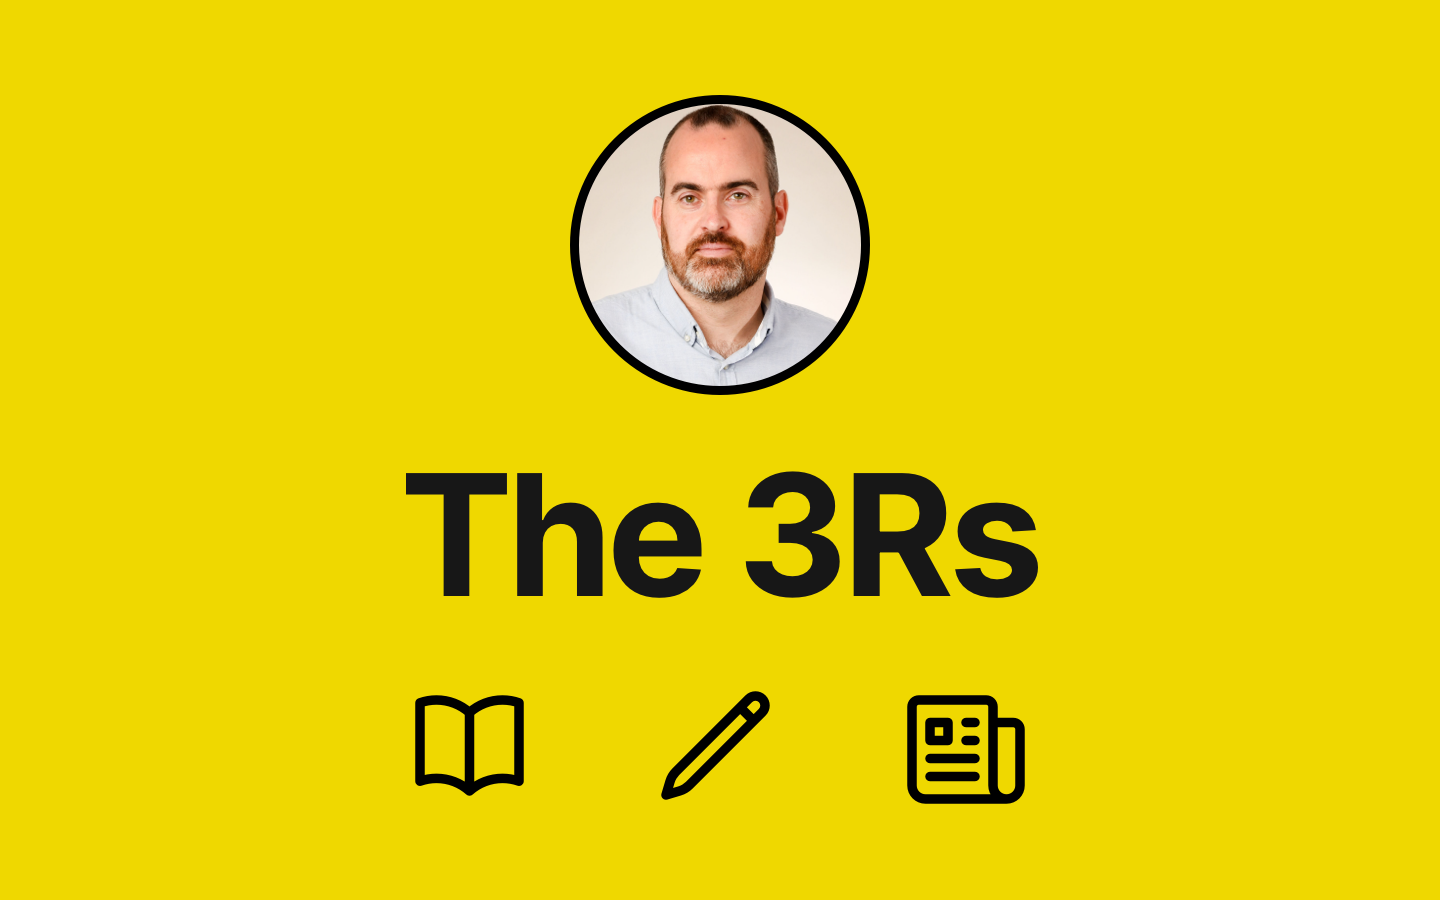 The 3Rs: What I'm reading, (w)riting, & the research I'm interested in - Issue #1 feature image